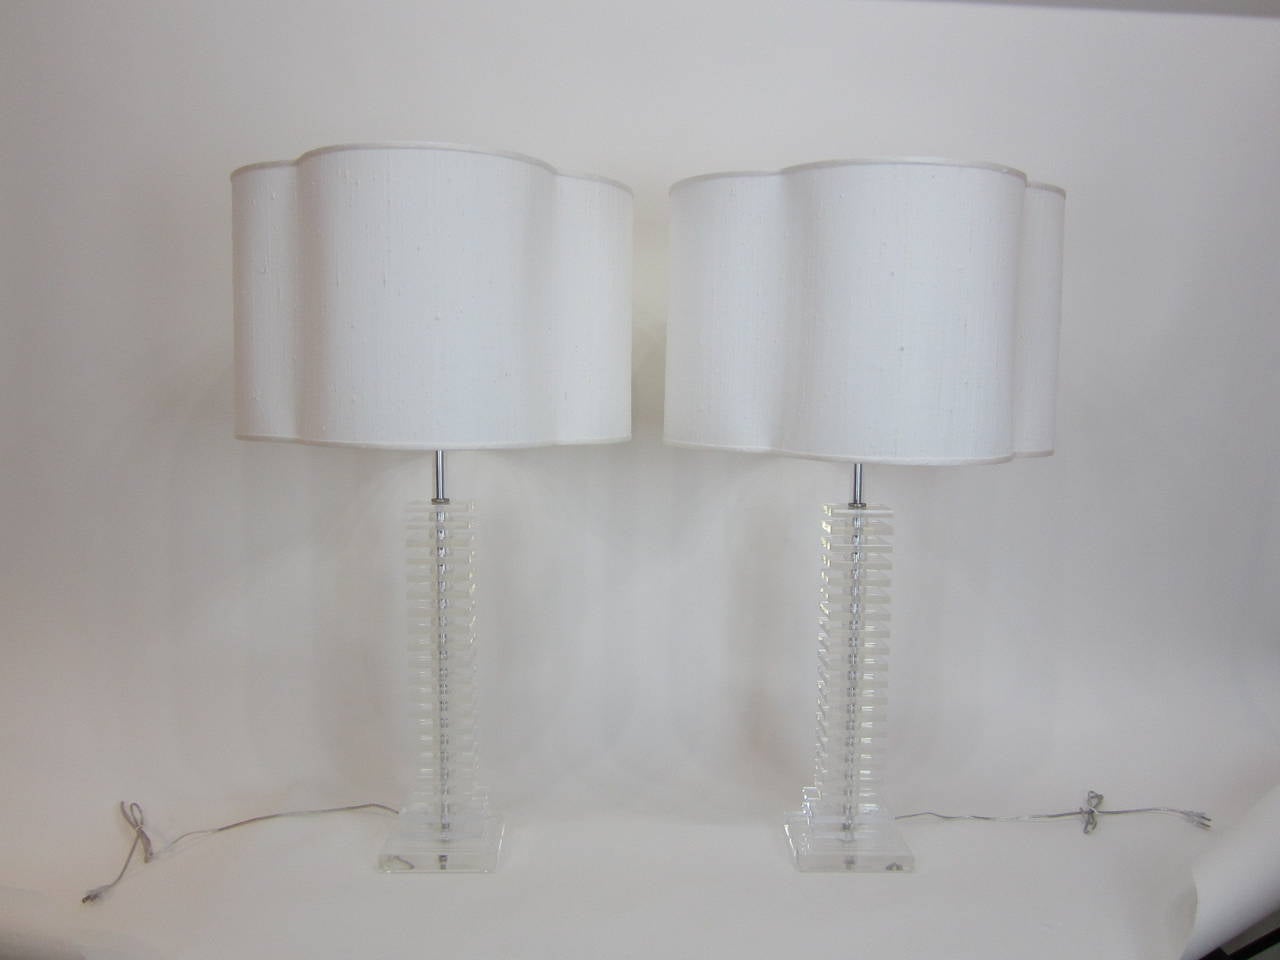 Tall and elegant pair of sliced and stacked lucite lamps fully rewired and appointed with nickel fittings and complimented with custom raw silk quatrefoil shades. 